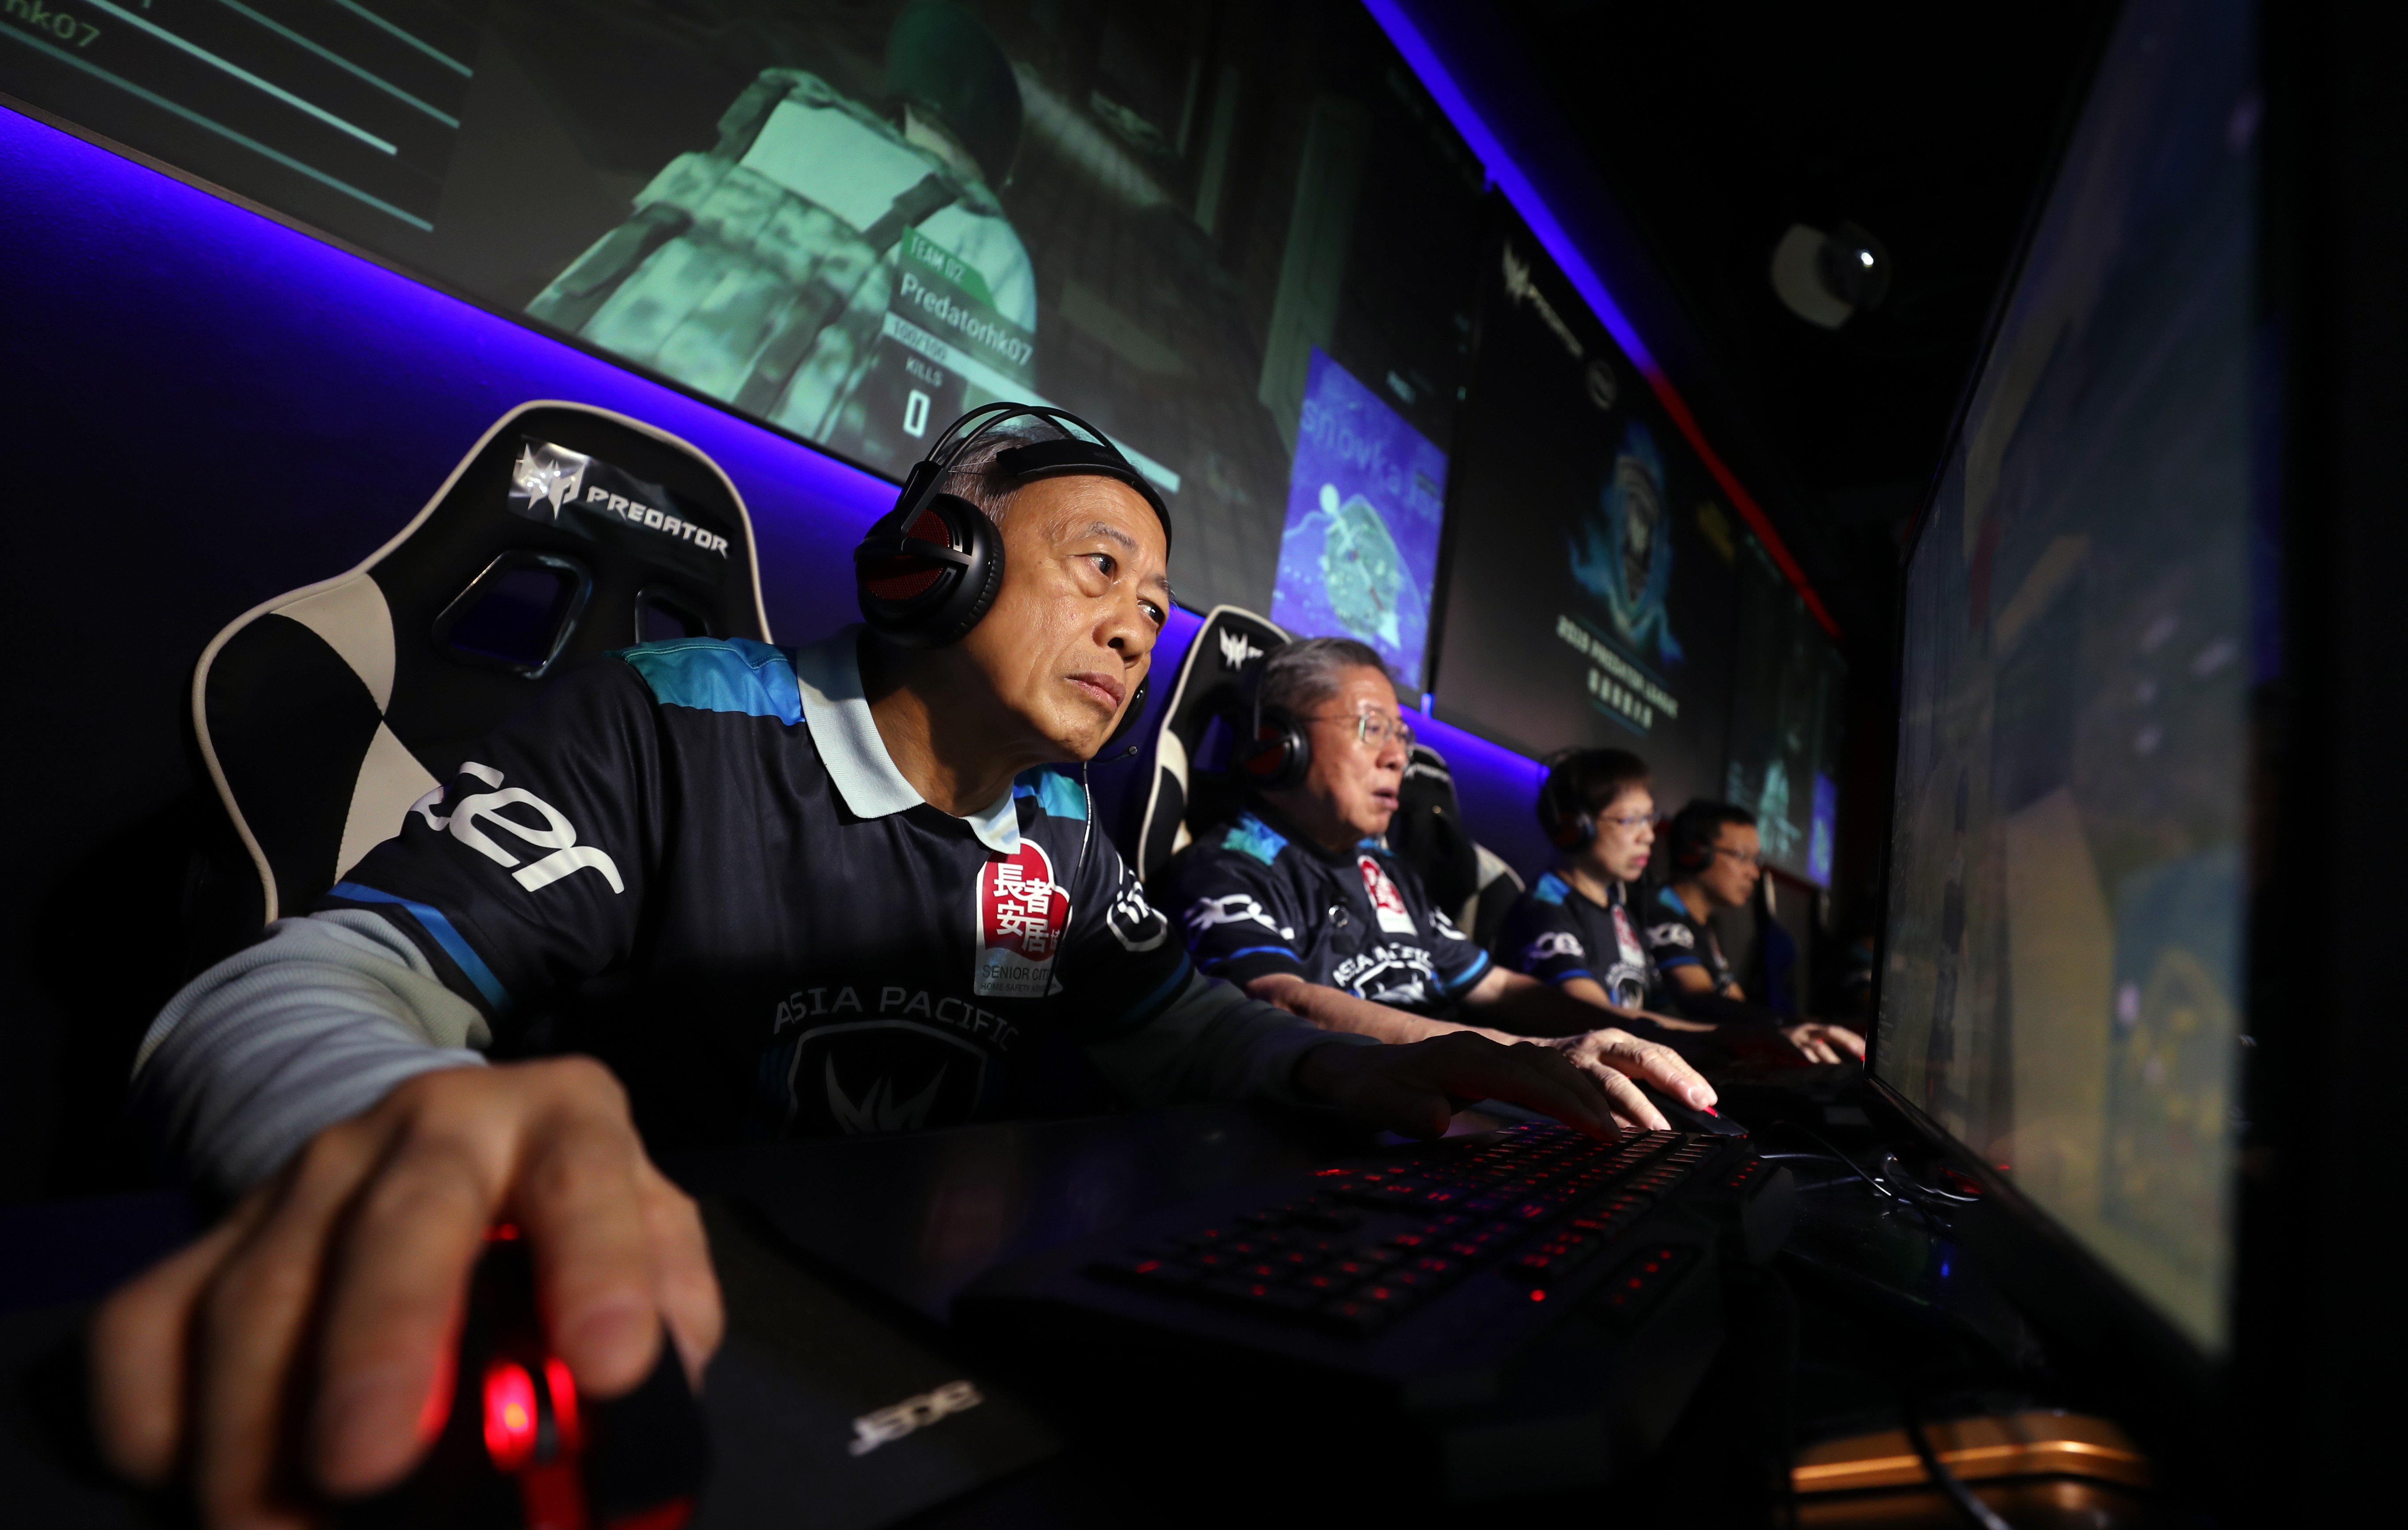 Senior players prove they can keep up with their younger peers in e-sports. Photo: Winson Wong